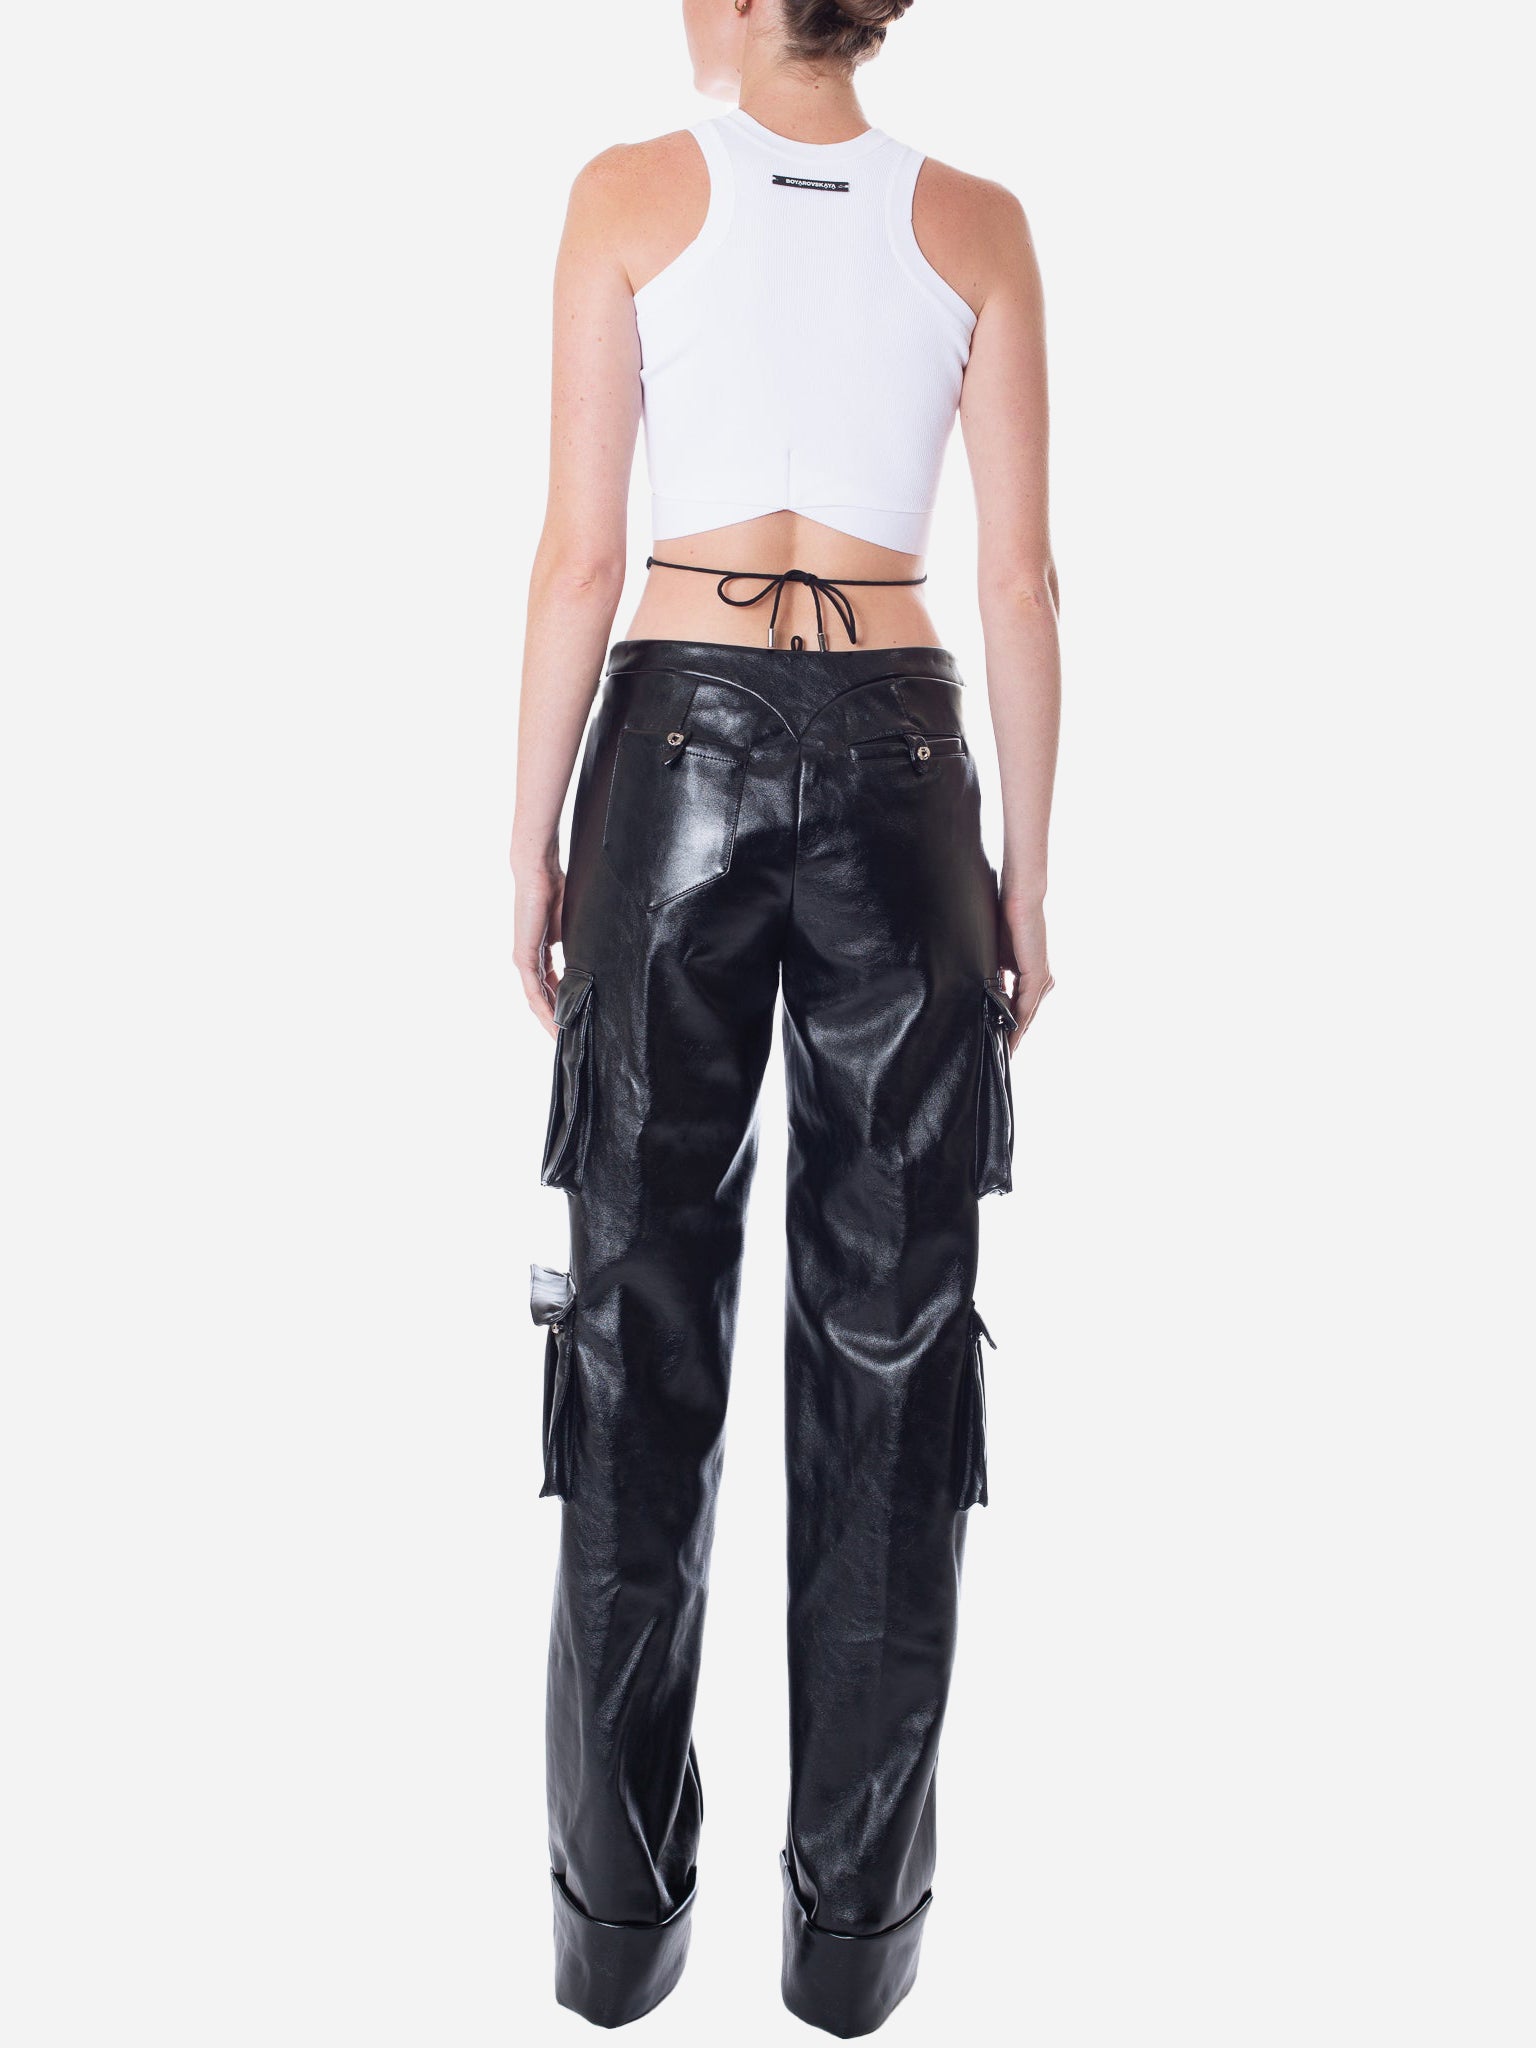 HAN WEN STUDIO V-waist Leather Cargo Pant with Detachable Strappy Waistbands